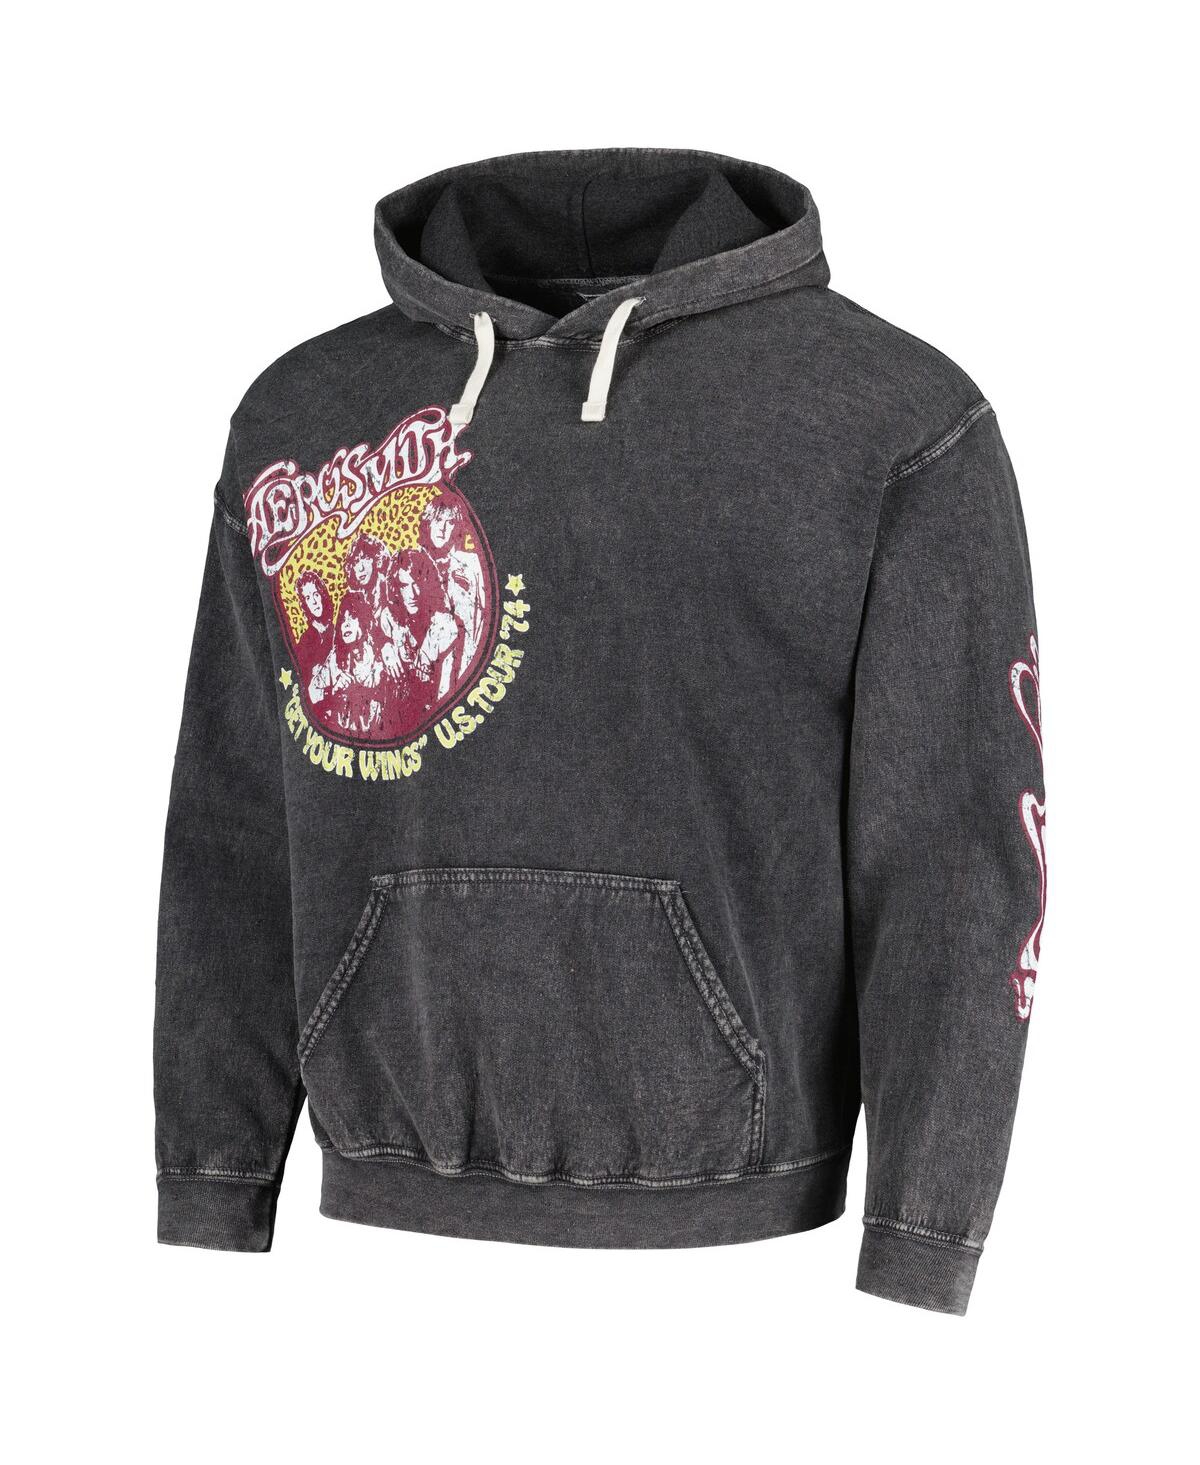 Shop Philcos Men's Black Aerosmith Get Your Wings Washed Pullover Hoodie